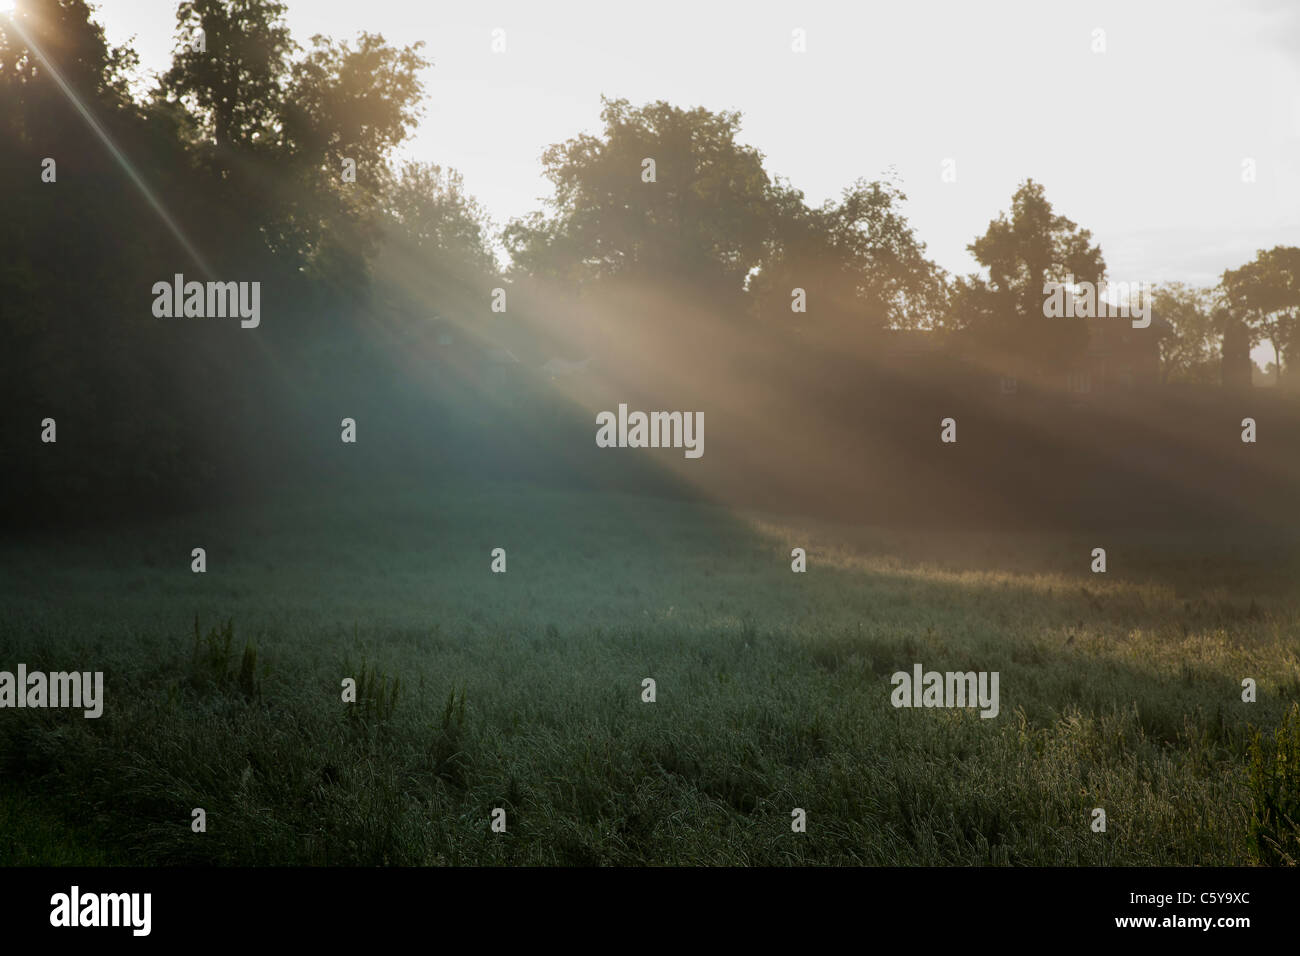 The rays of light are seen through thick fog, the sun is rising behind the trees near a field one early morning Stock Photo